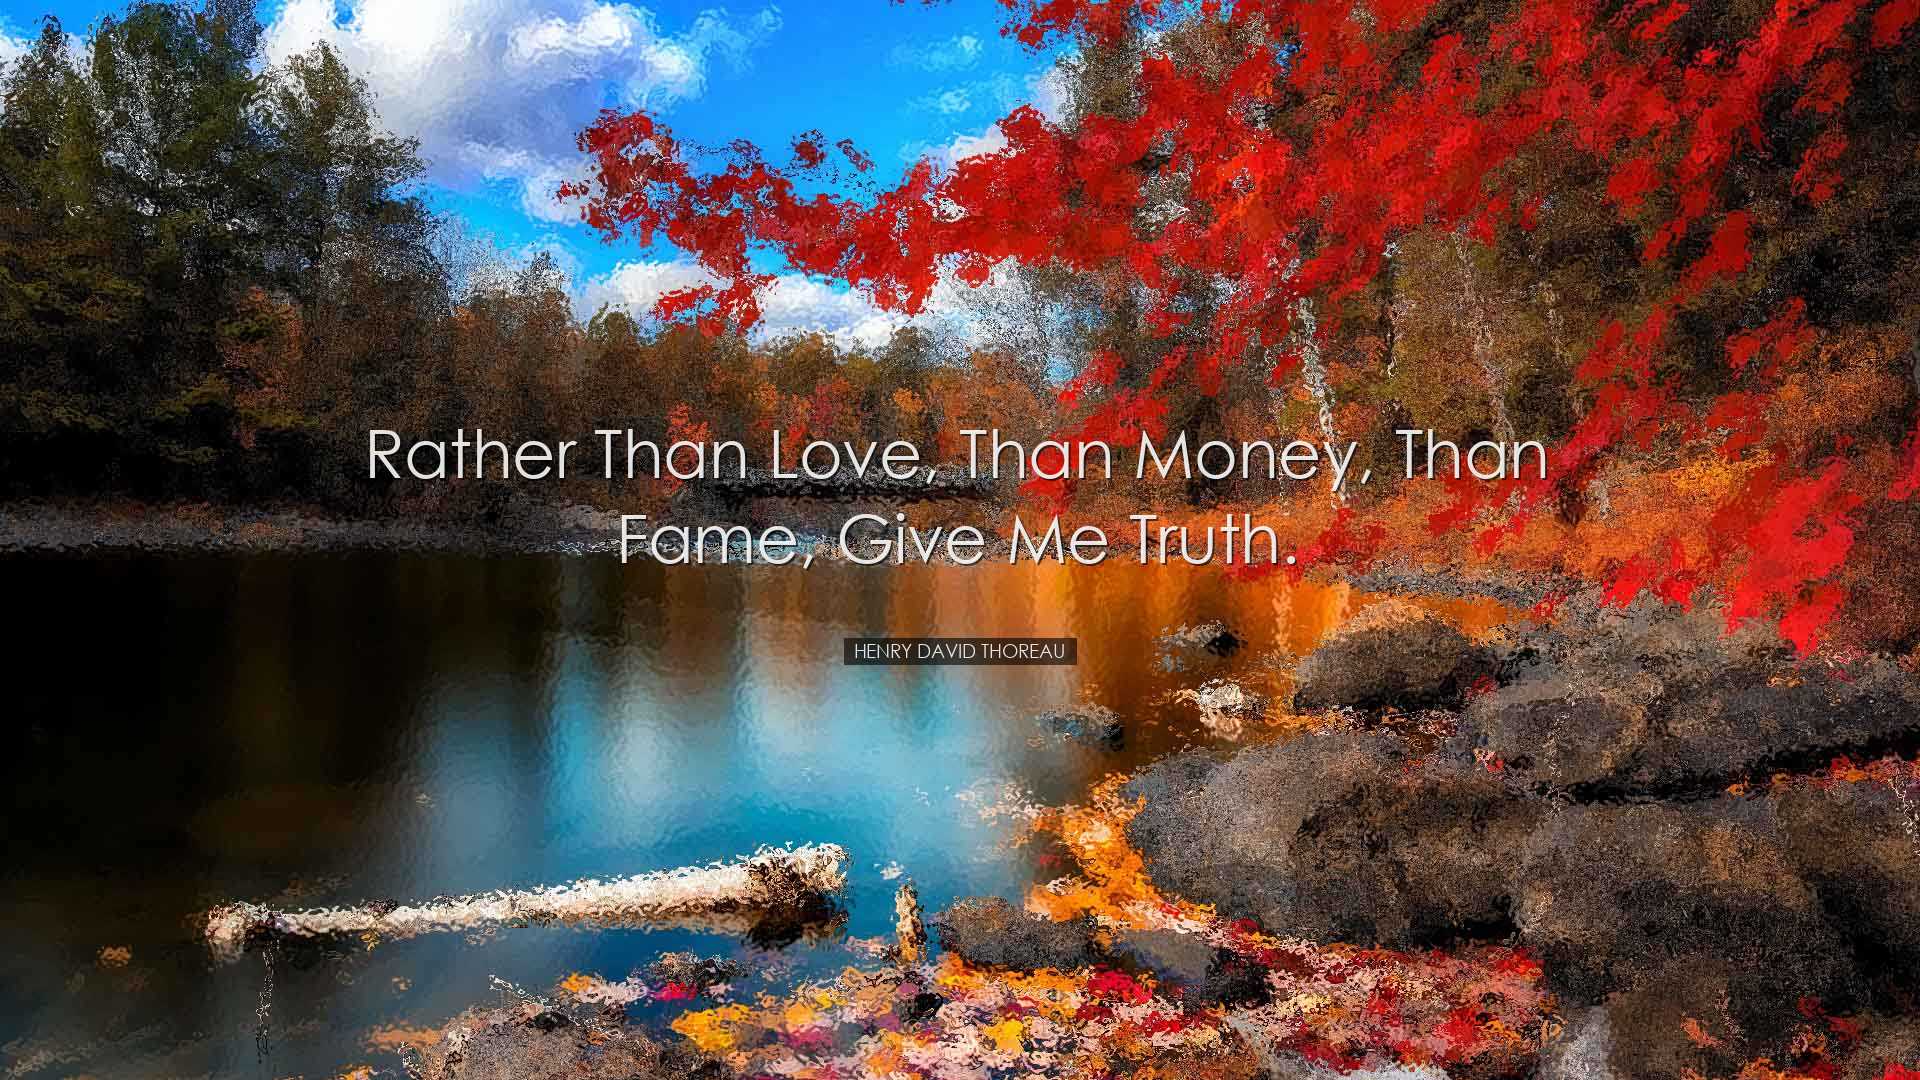 Rather than love, than money, than fame, give me truth. - Henry Da